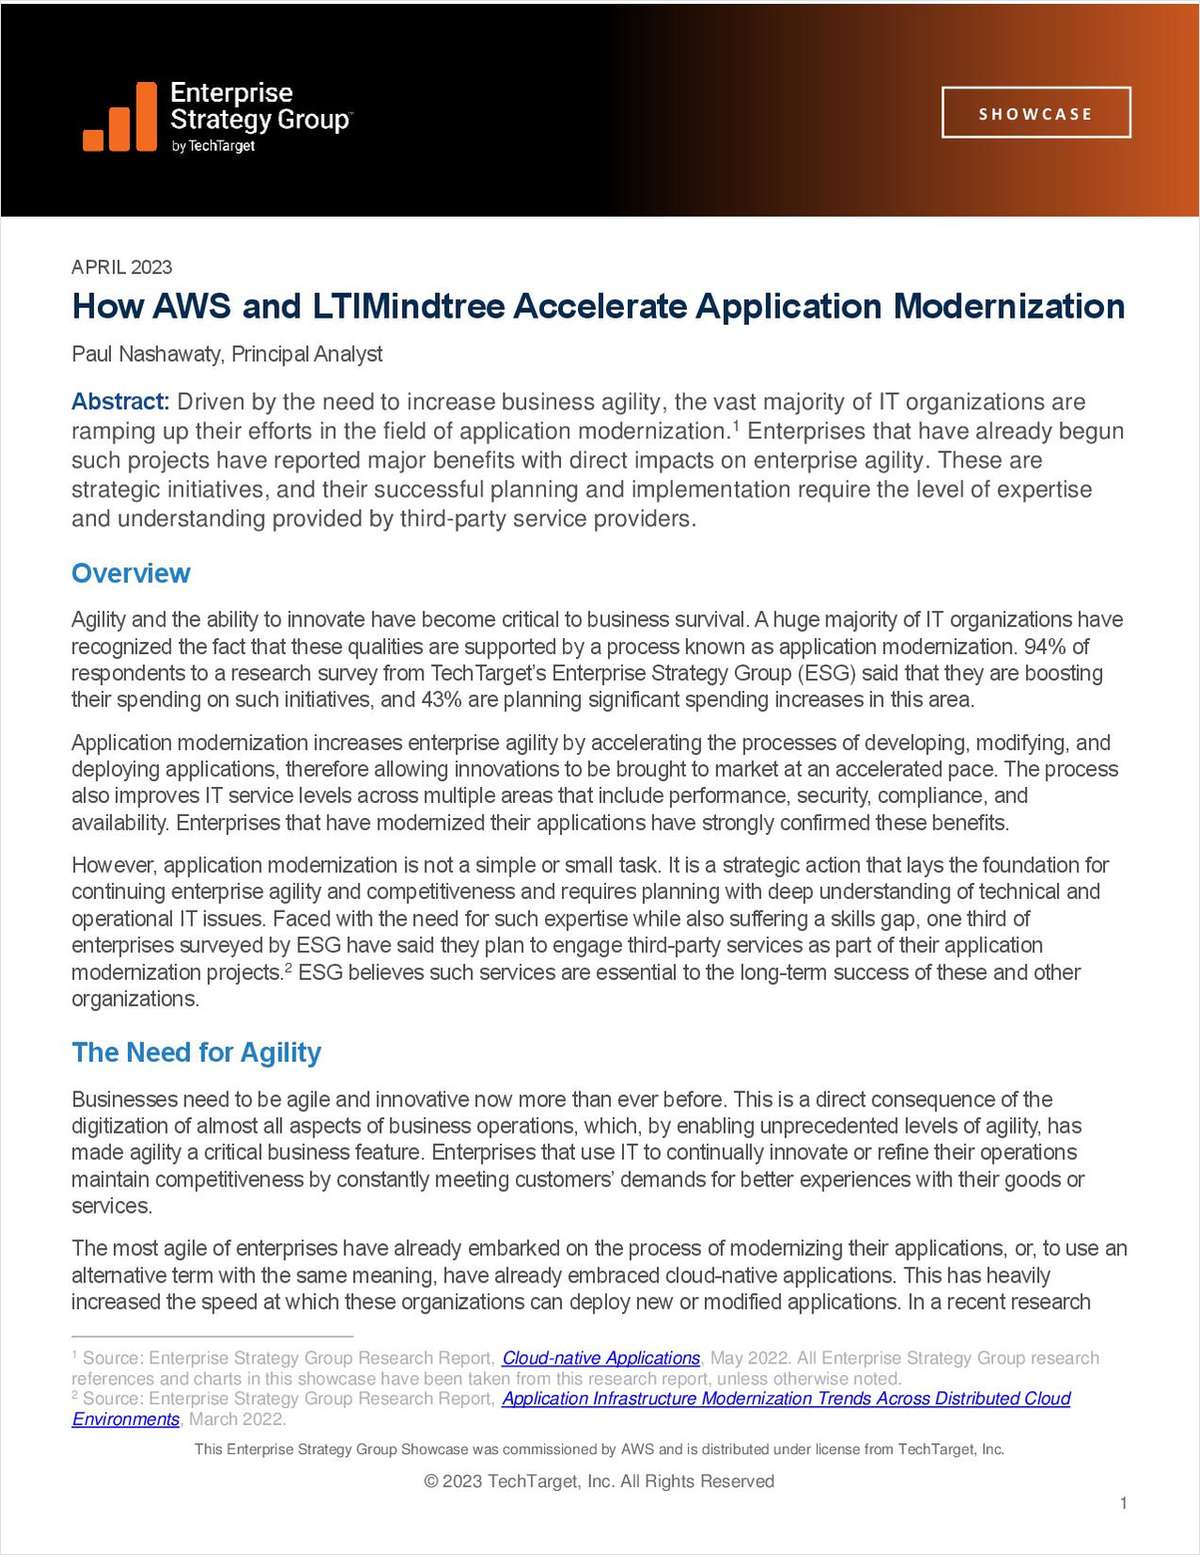 How AWS and LTIMindtree Accelerate Application Modernization